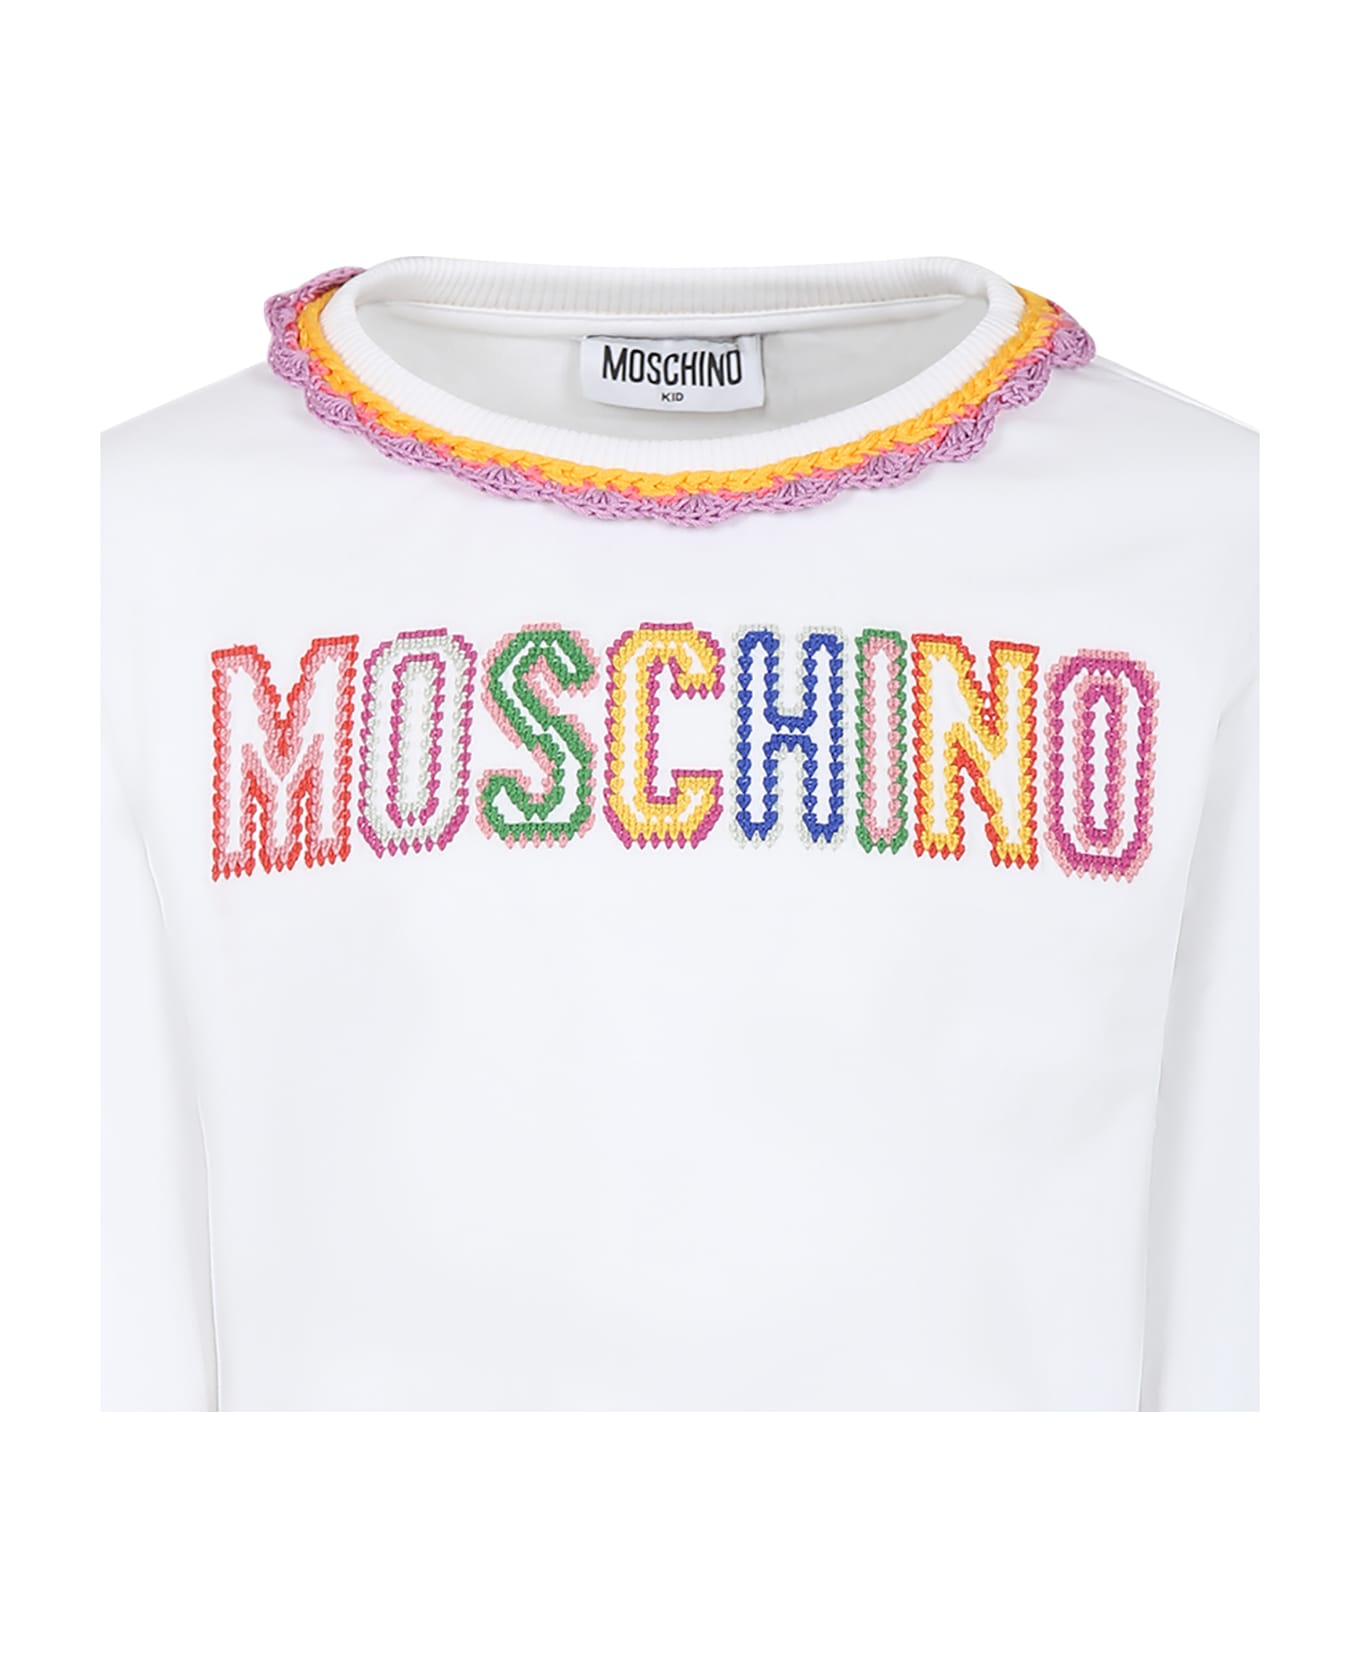 Moschino White Sweatshirt For Girl With Embroidered Logo - White